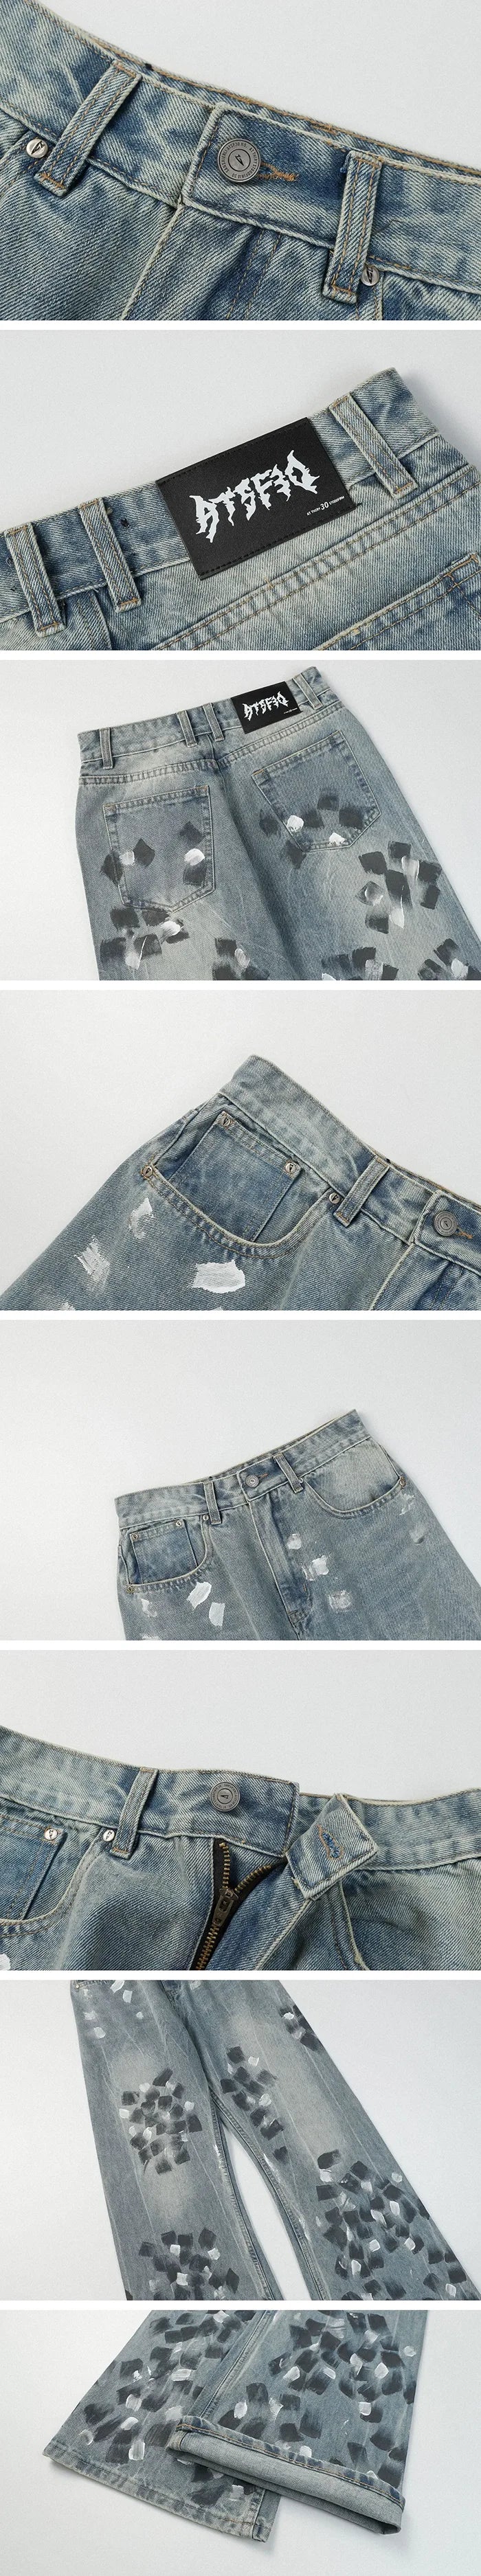 details of the Jeans y2k "Tamba"